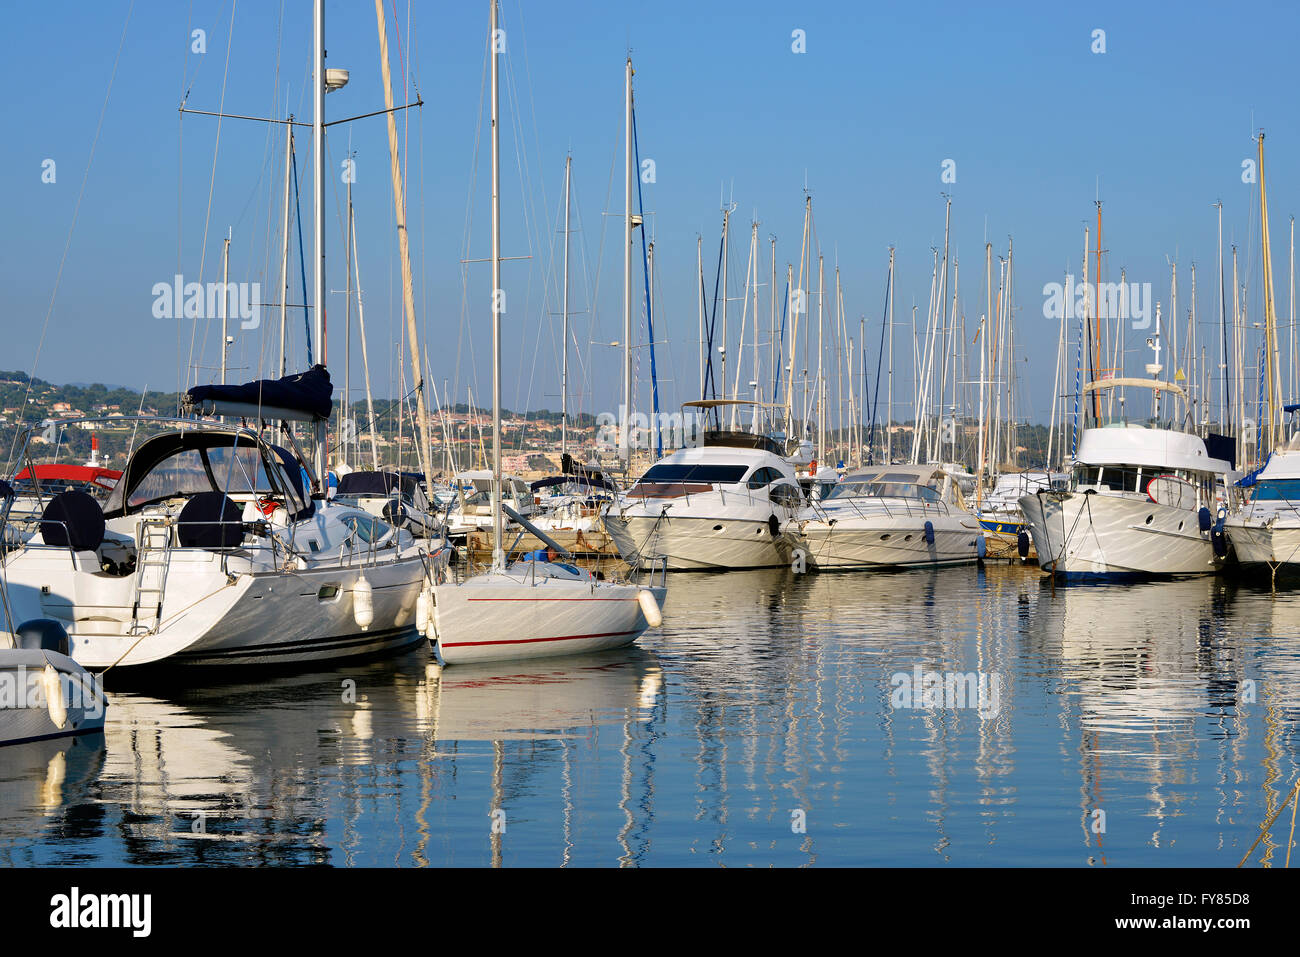 Port of Bandol, commune in the Var department in the Provence-Alpes-Côte d'Azur region in southeastern France. Stock Photo